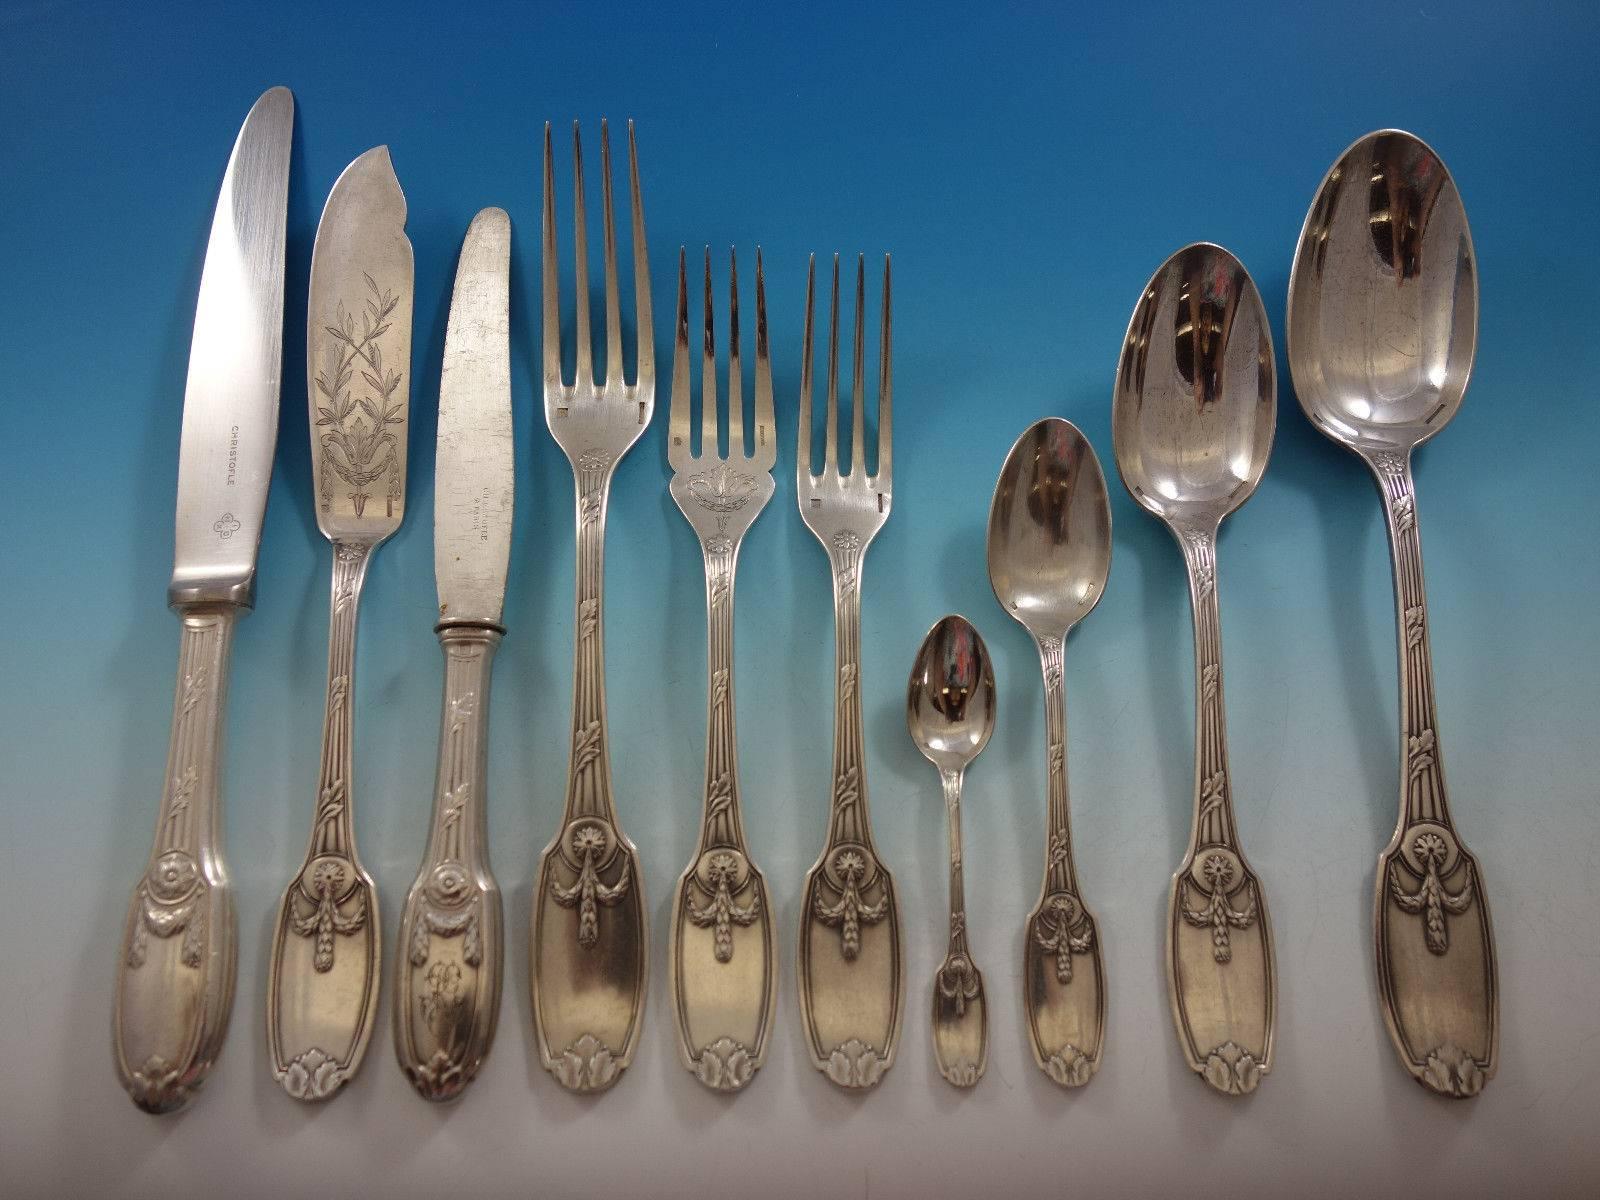 Delafosse by Christofle silver plated flatware set of 137 pieces. This set includes: 
12 dinner size knives, 9 3/4